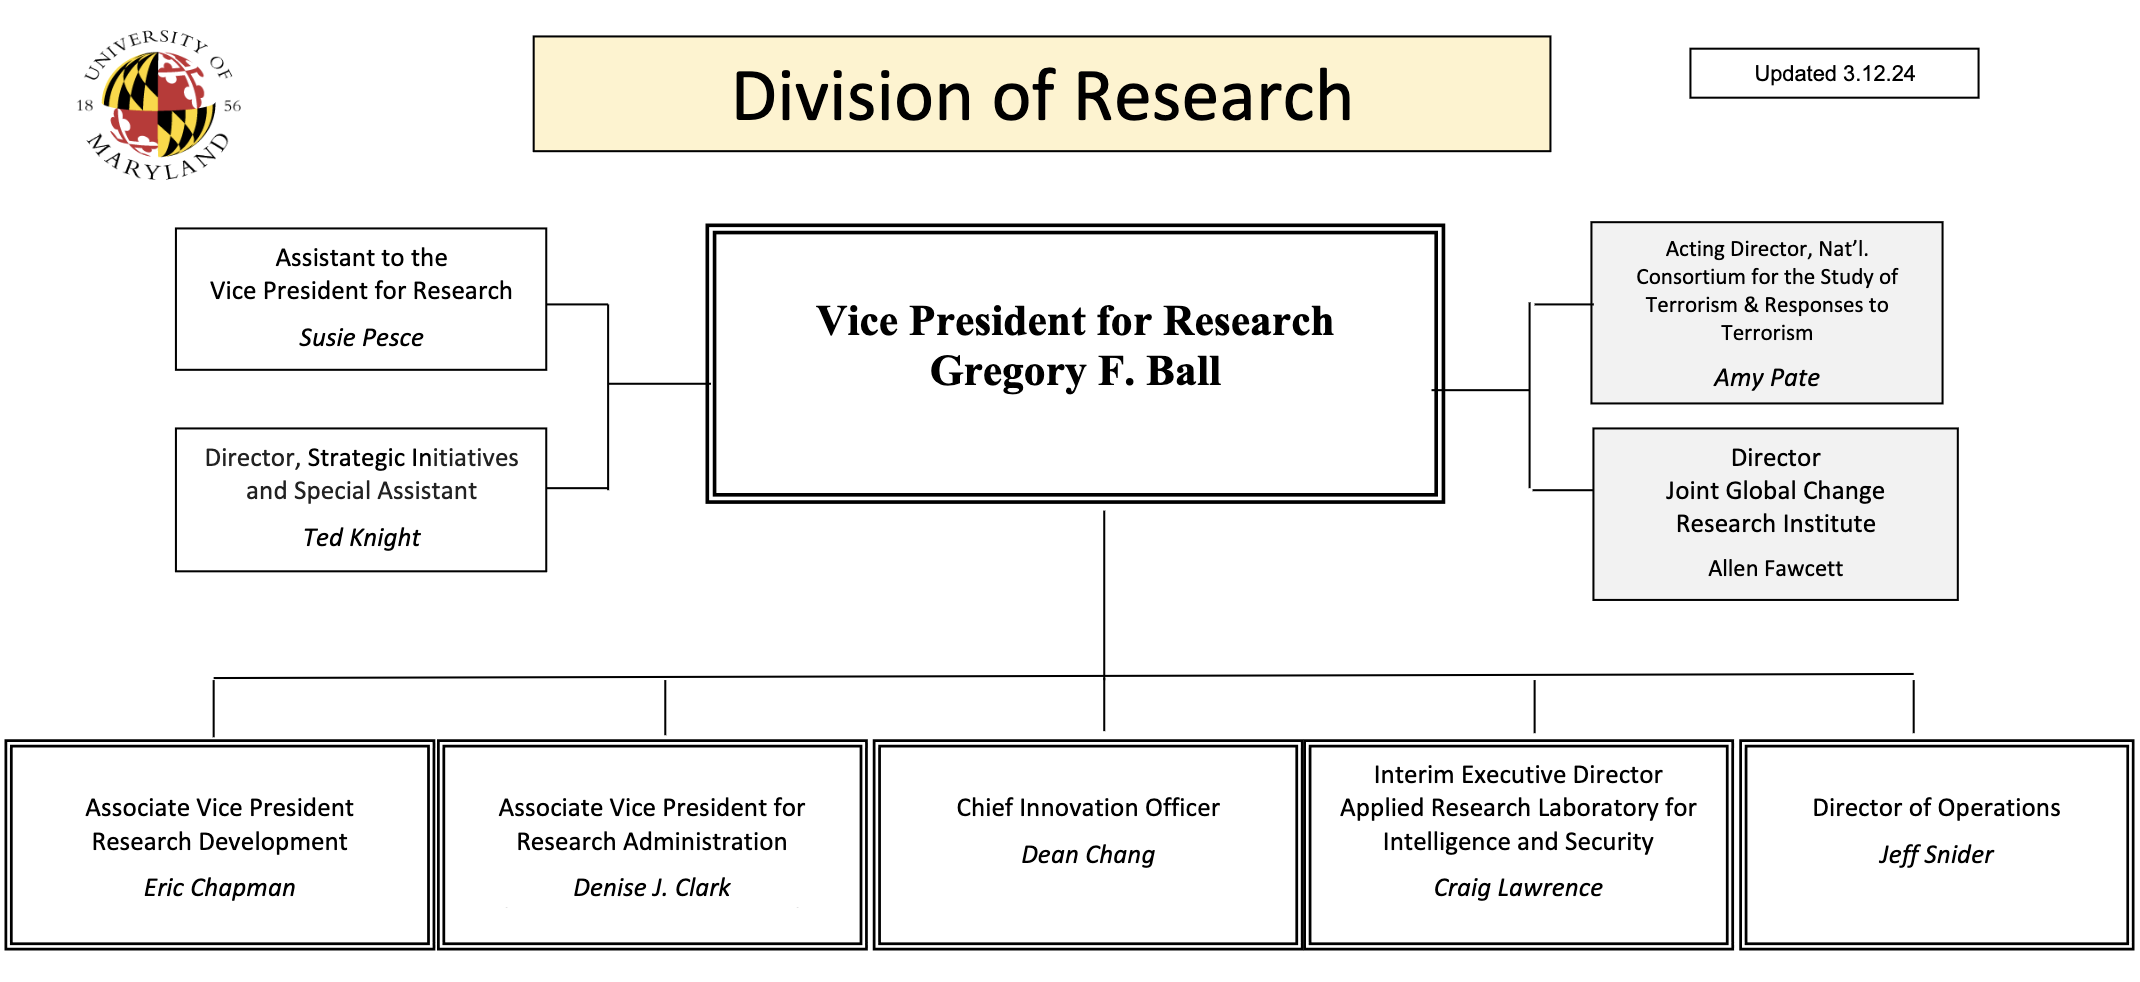 Division of Research Org Chart